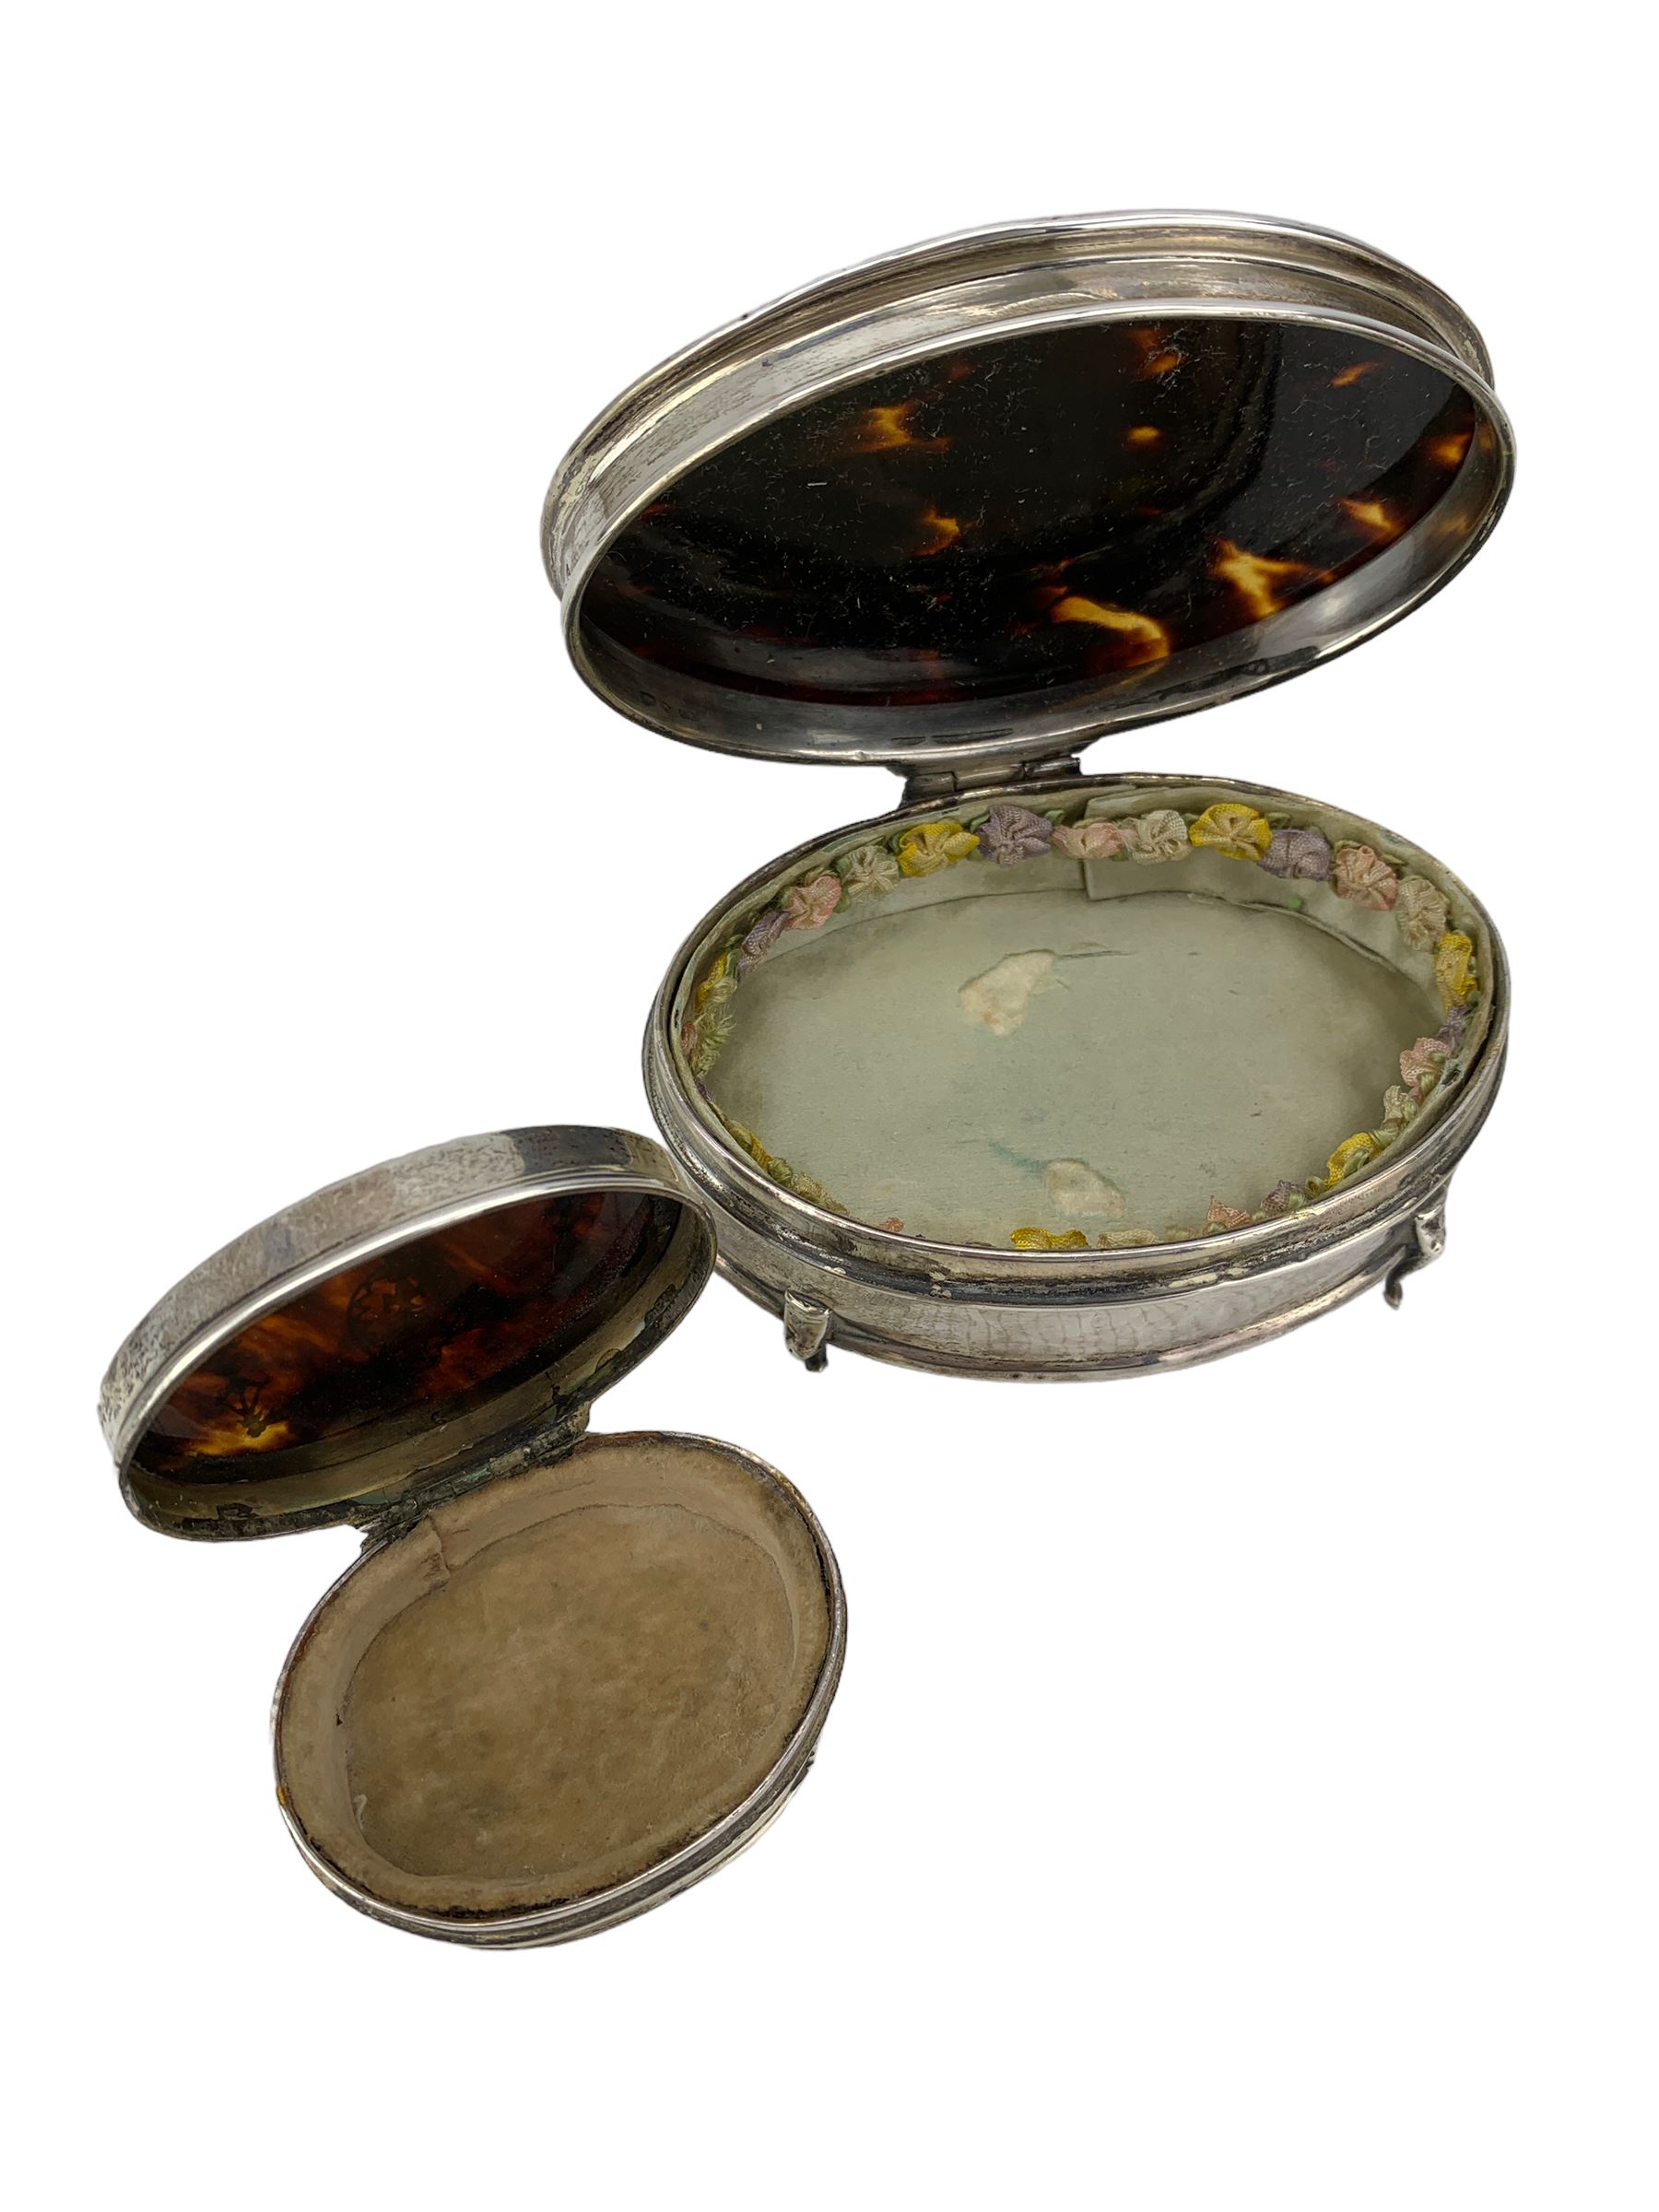 Early 20th century matched three-piece silver and tortoiseshell dressing table set comprising a glas - Image 3 of 3